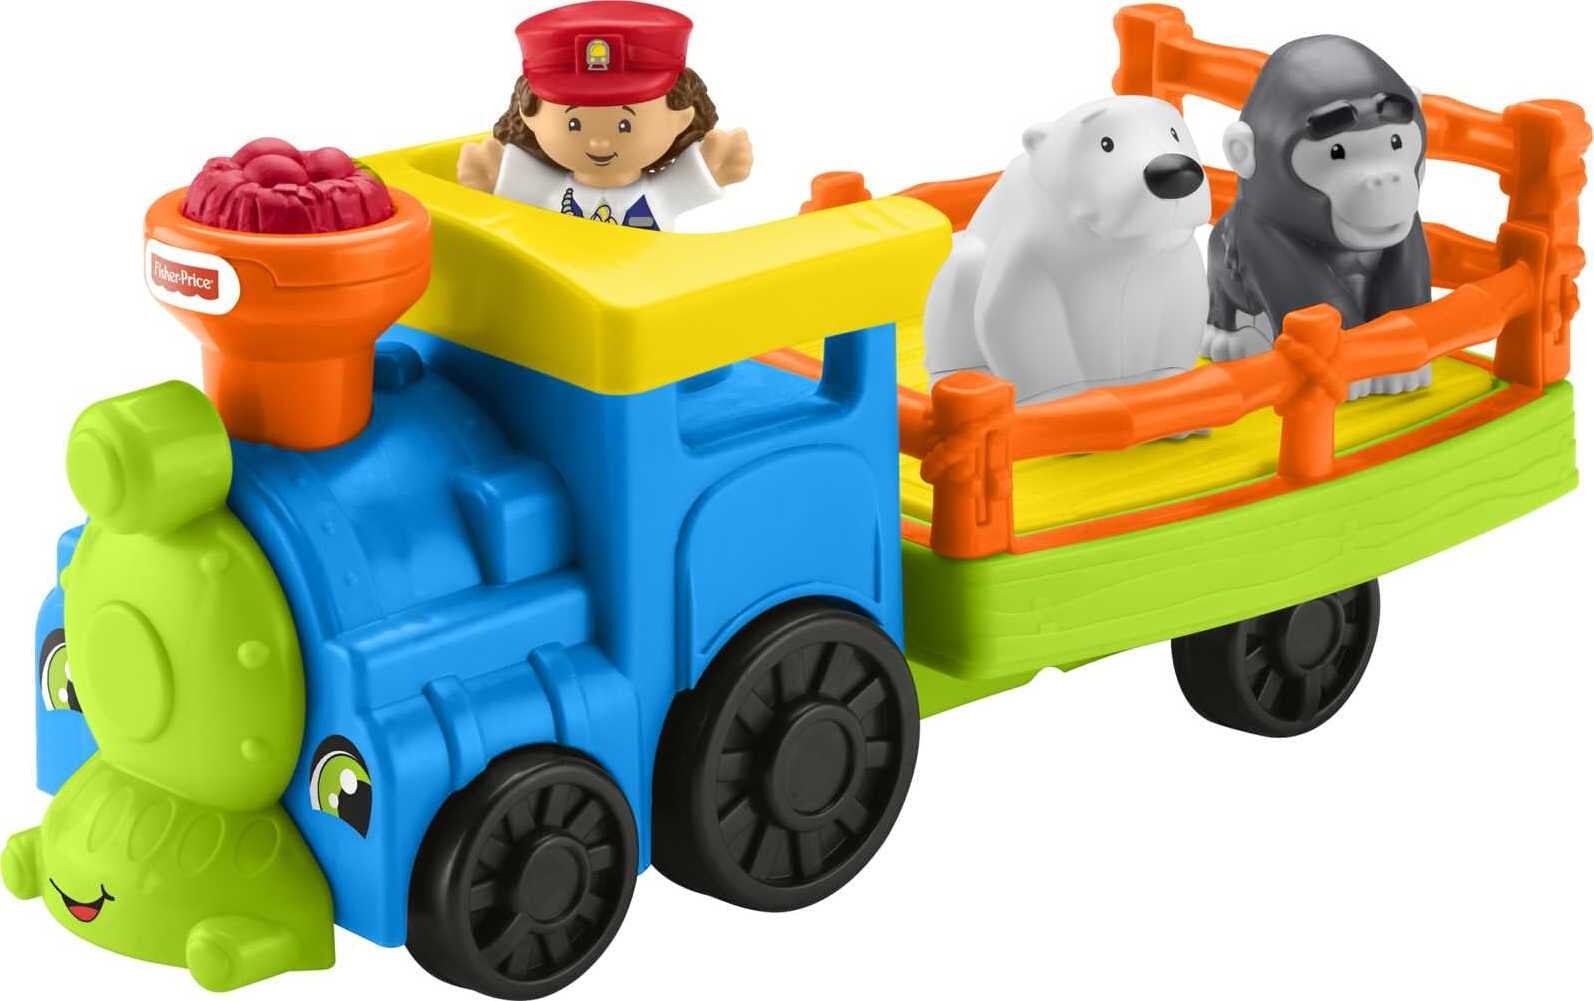 Fisher-Price Little People Zoo Train Toy with Music and Sounds, 3 Figures, Toddler Toy